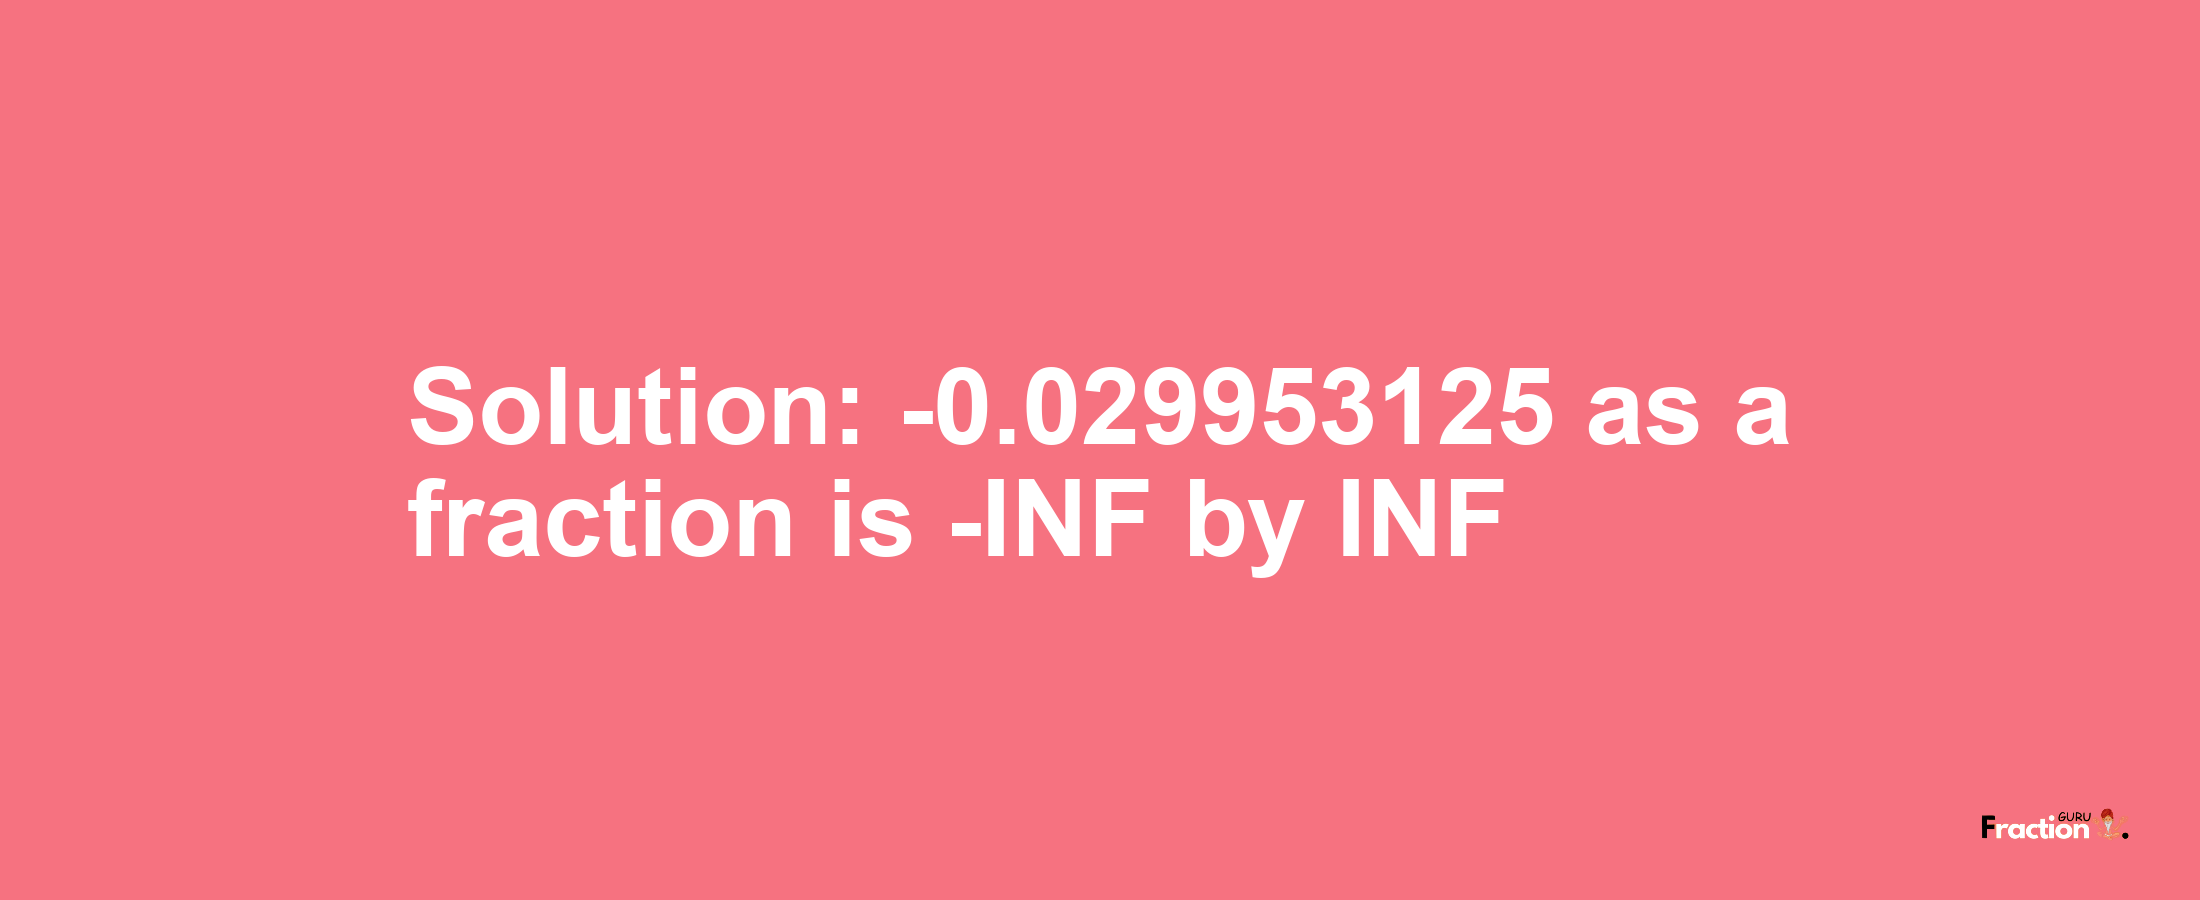 Solution:-0.029953125 as a fraction is -INF/INF